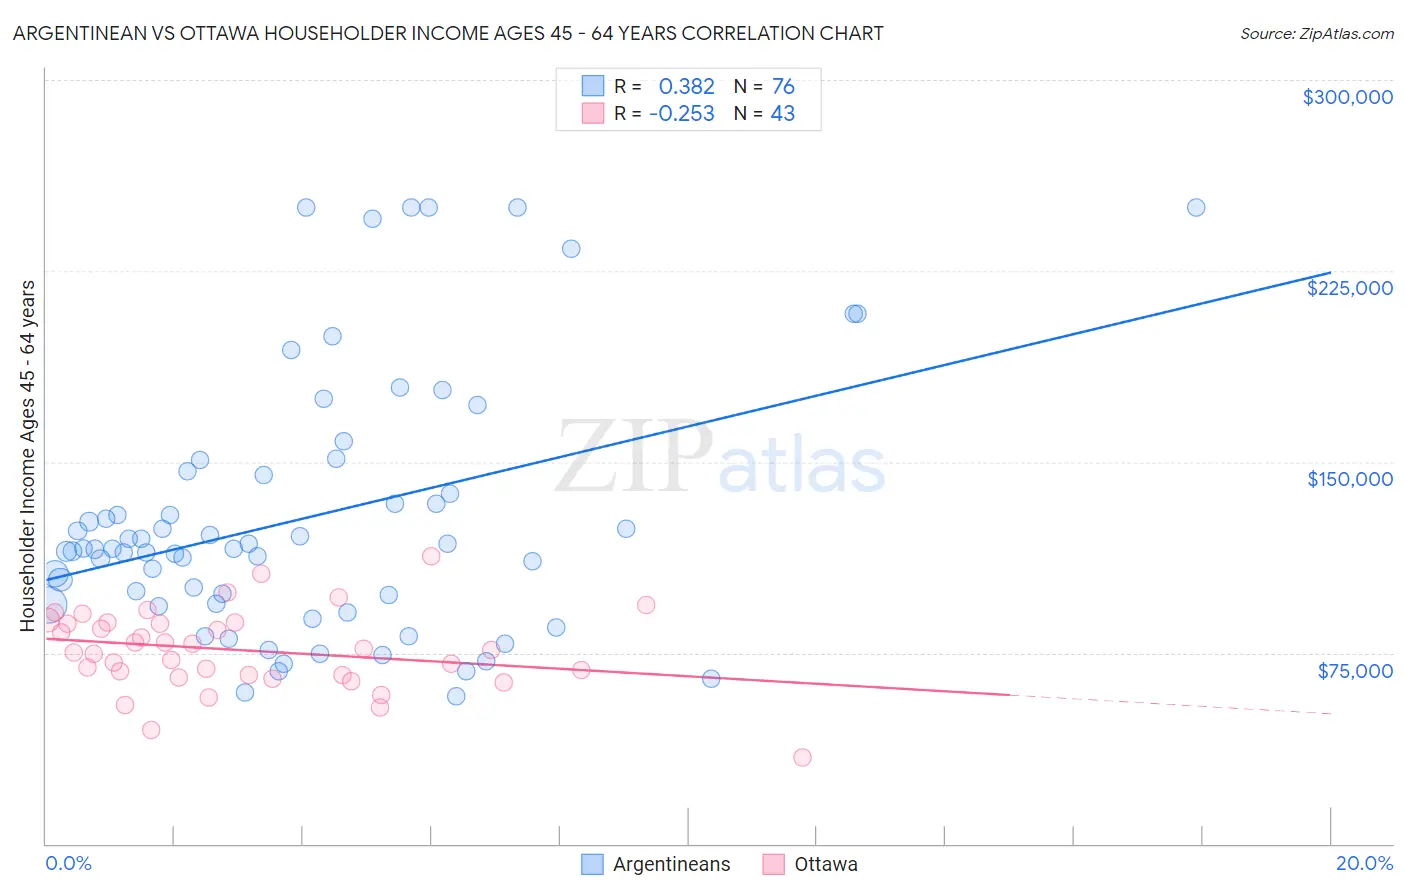 Argentinean vs Ottawa Householder Income Ages 45 - 64 years